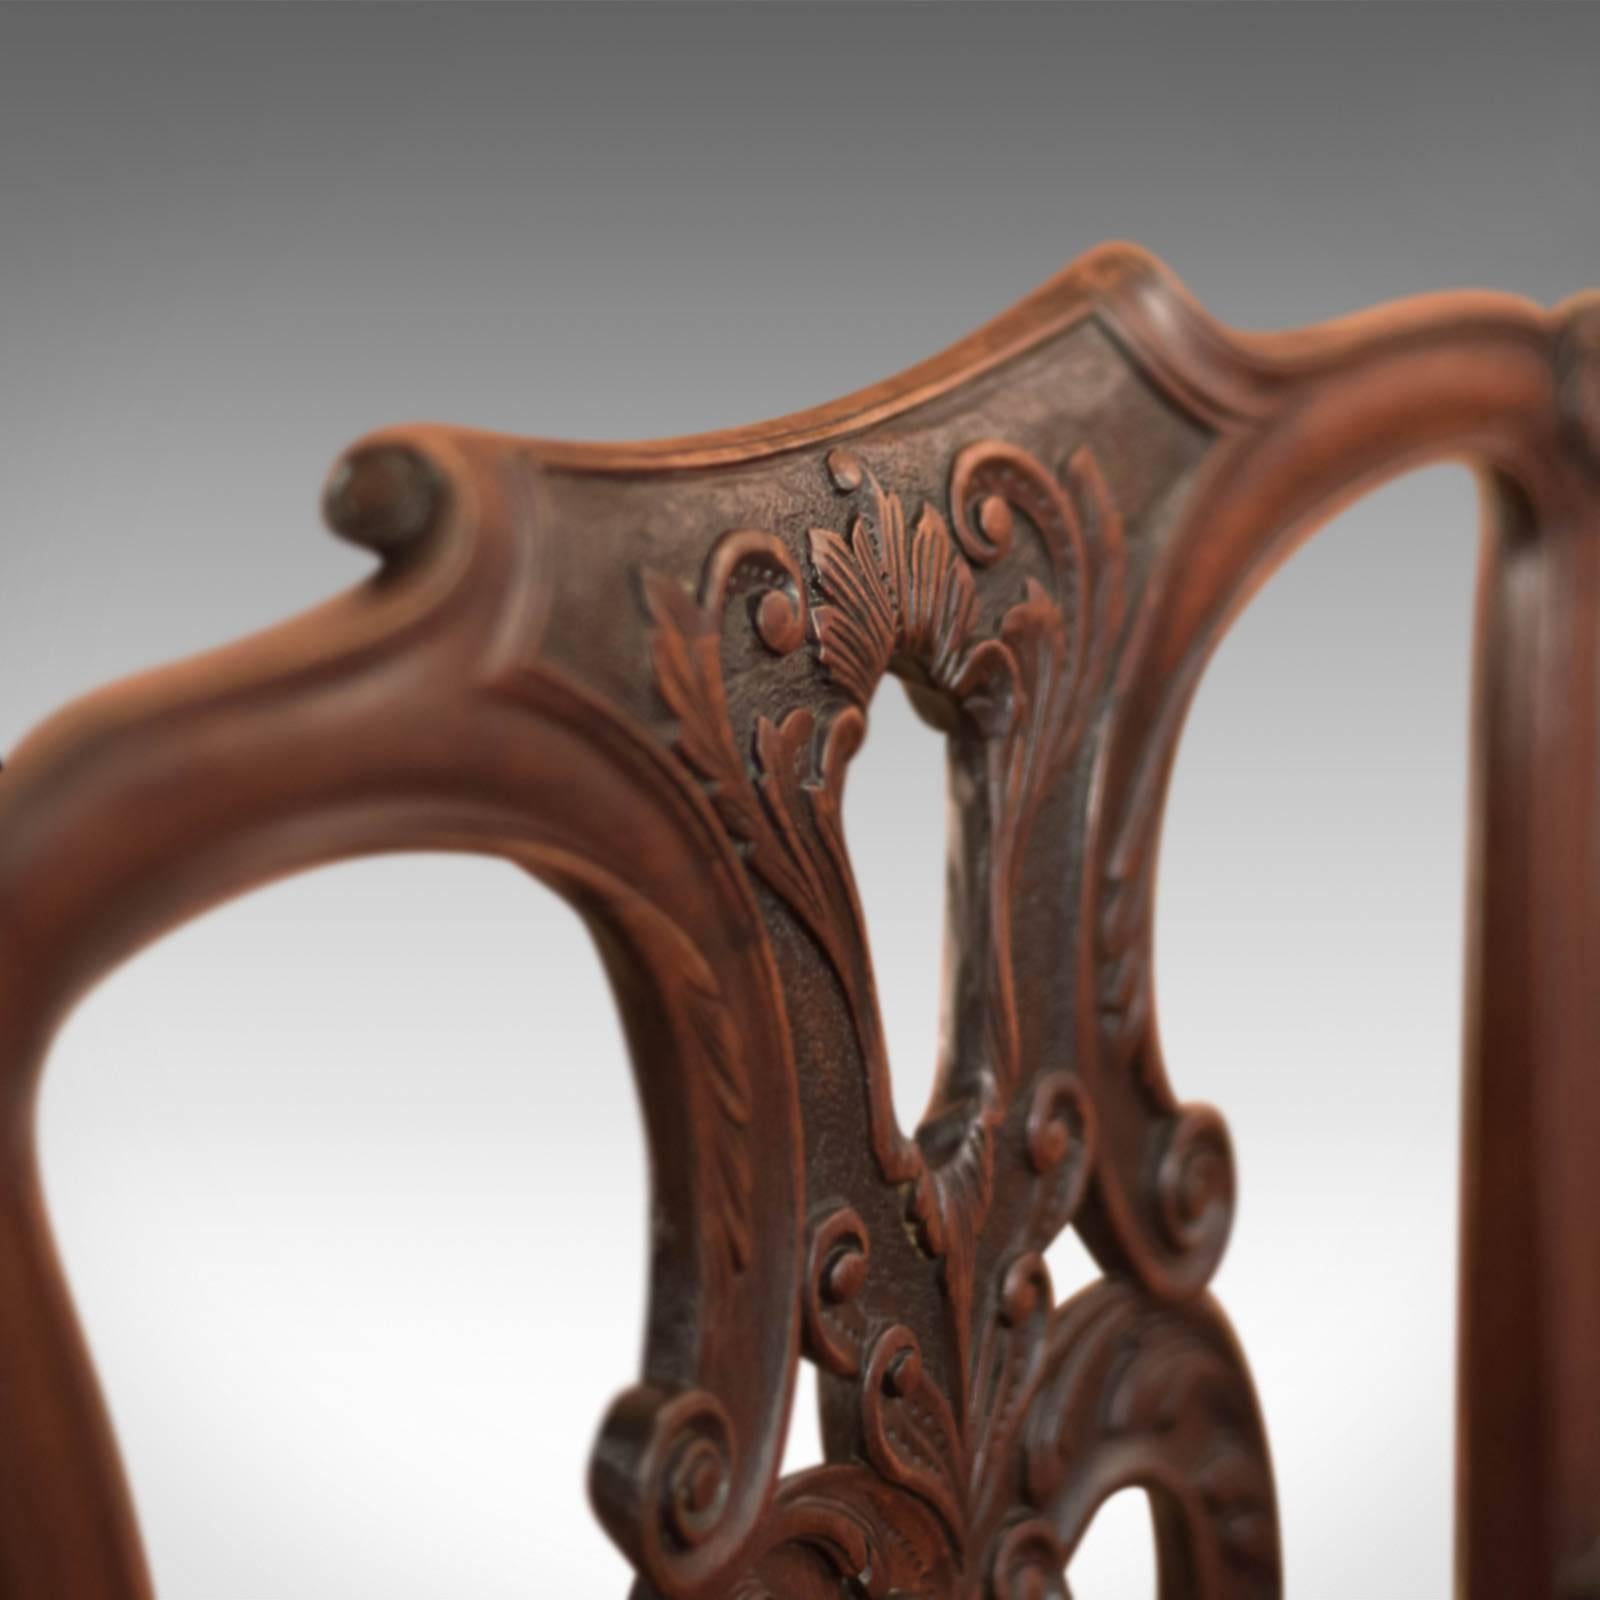 Mahogany Antique Elbow Chair, 19th Century in Chippendale Taste For Sale